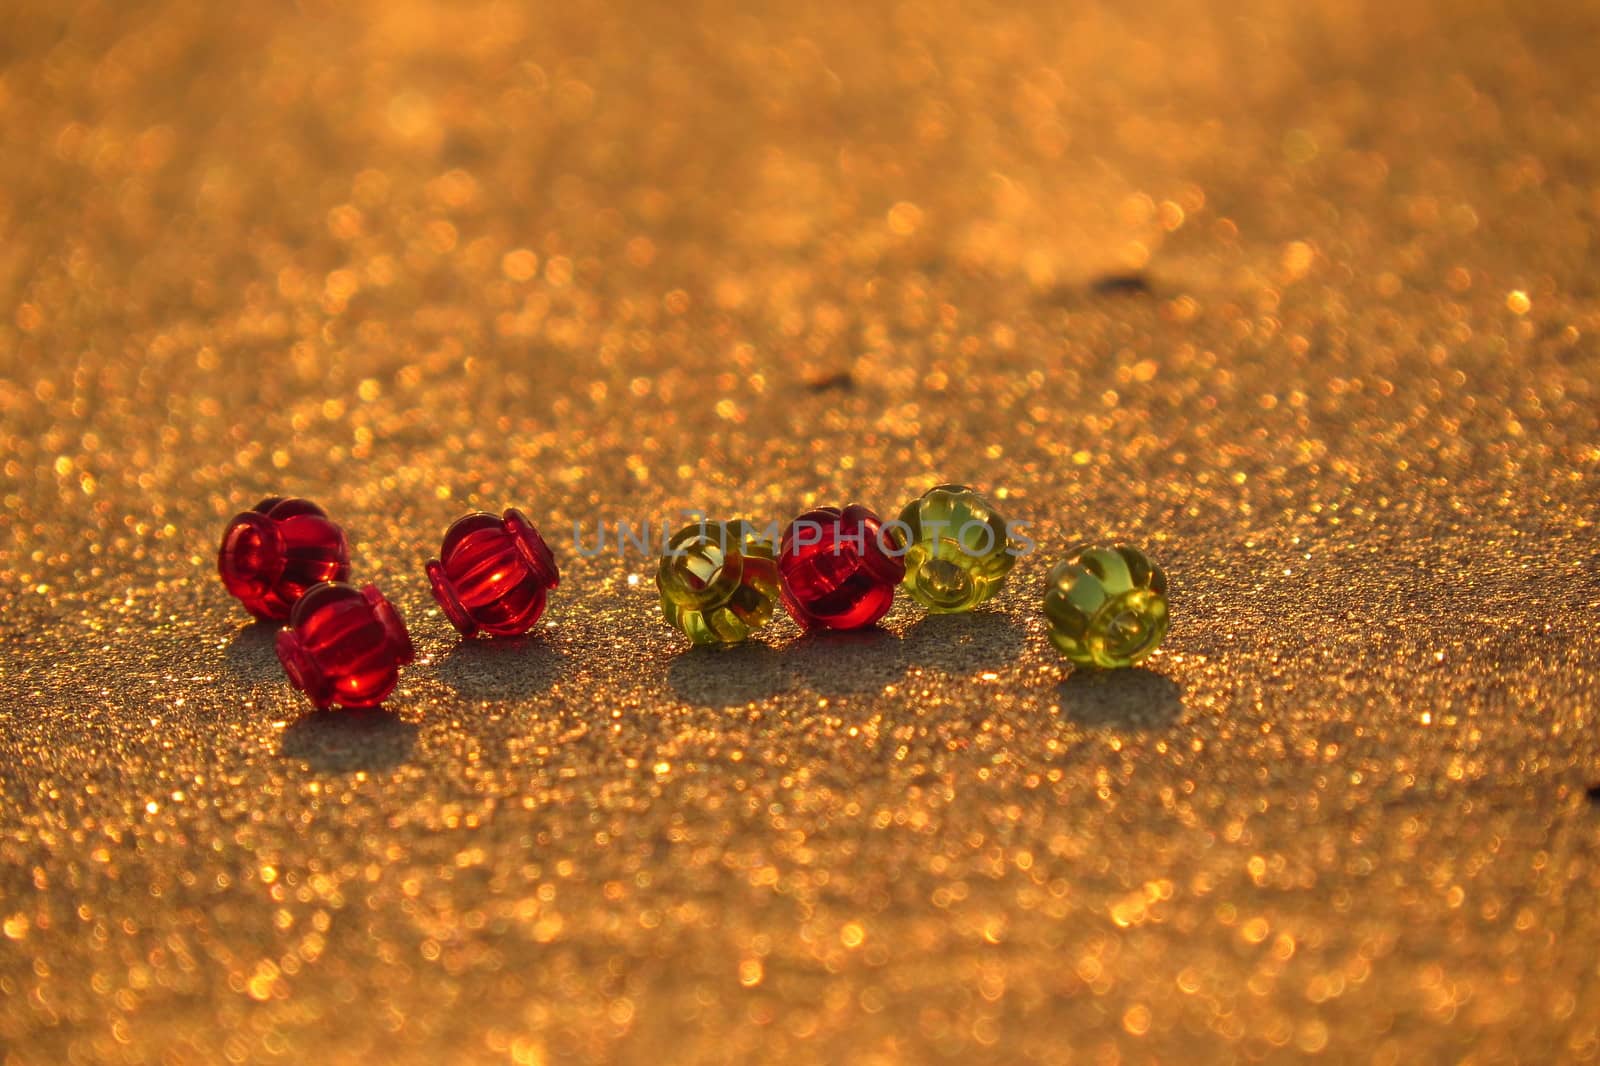 Beads on Golden Sand by thefinalmiracle